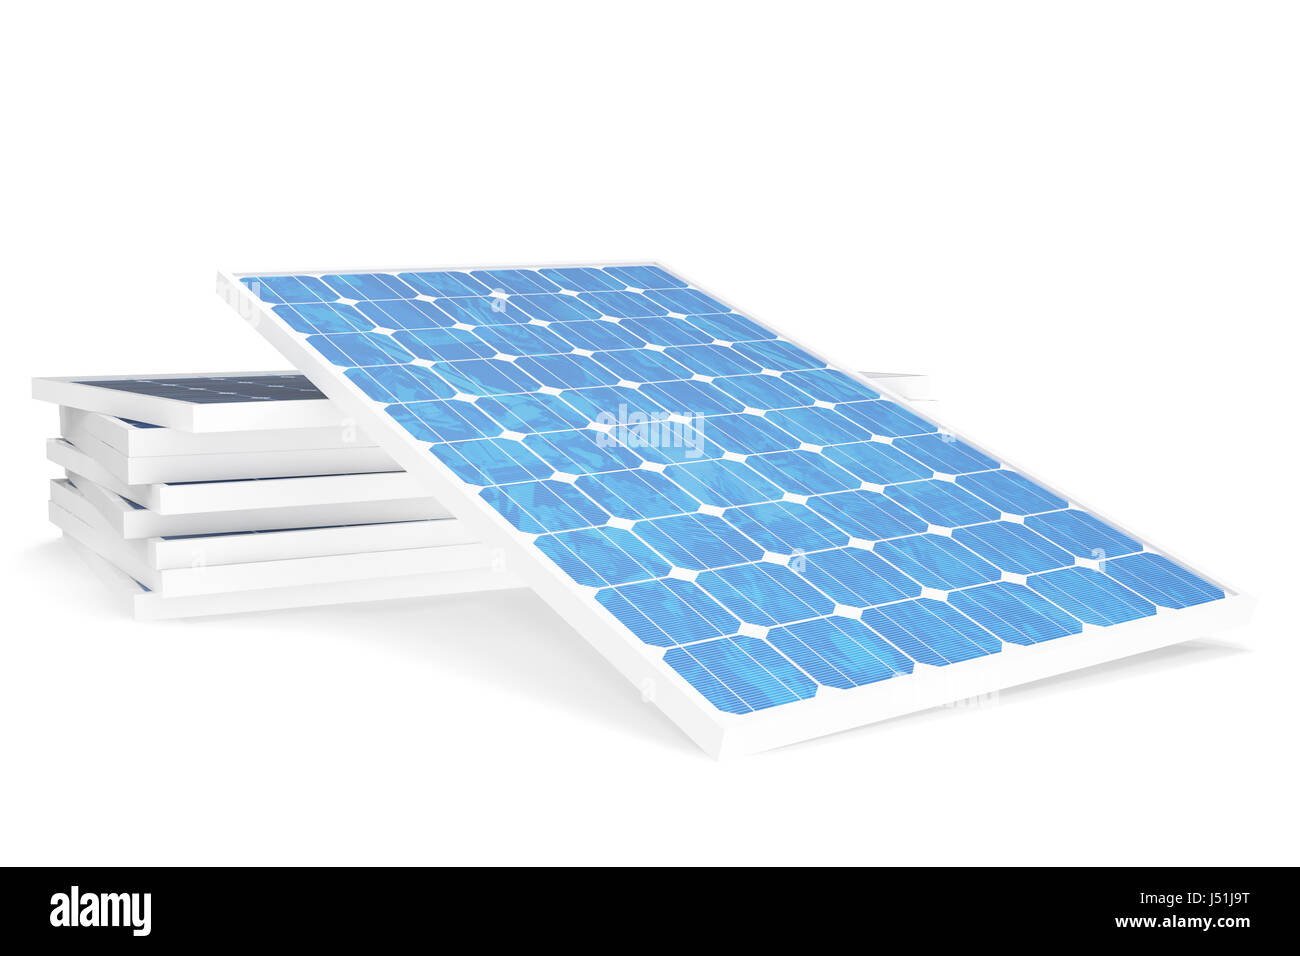 3D illustration solar power generation technology. Blue solar panels. Concept alternative electricity source. Eco energy, clean Energy isolated on white background. Stock Photo